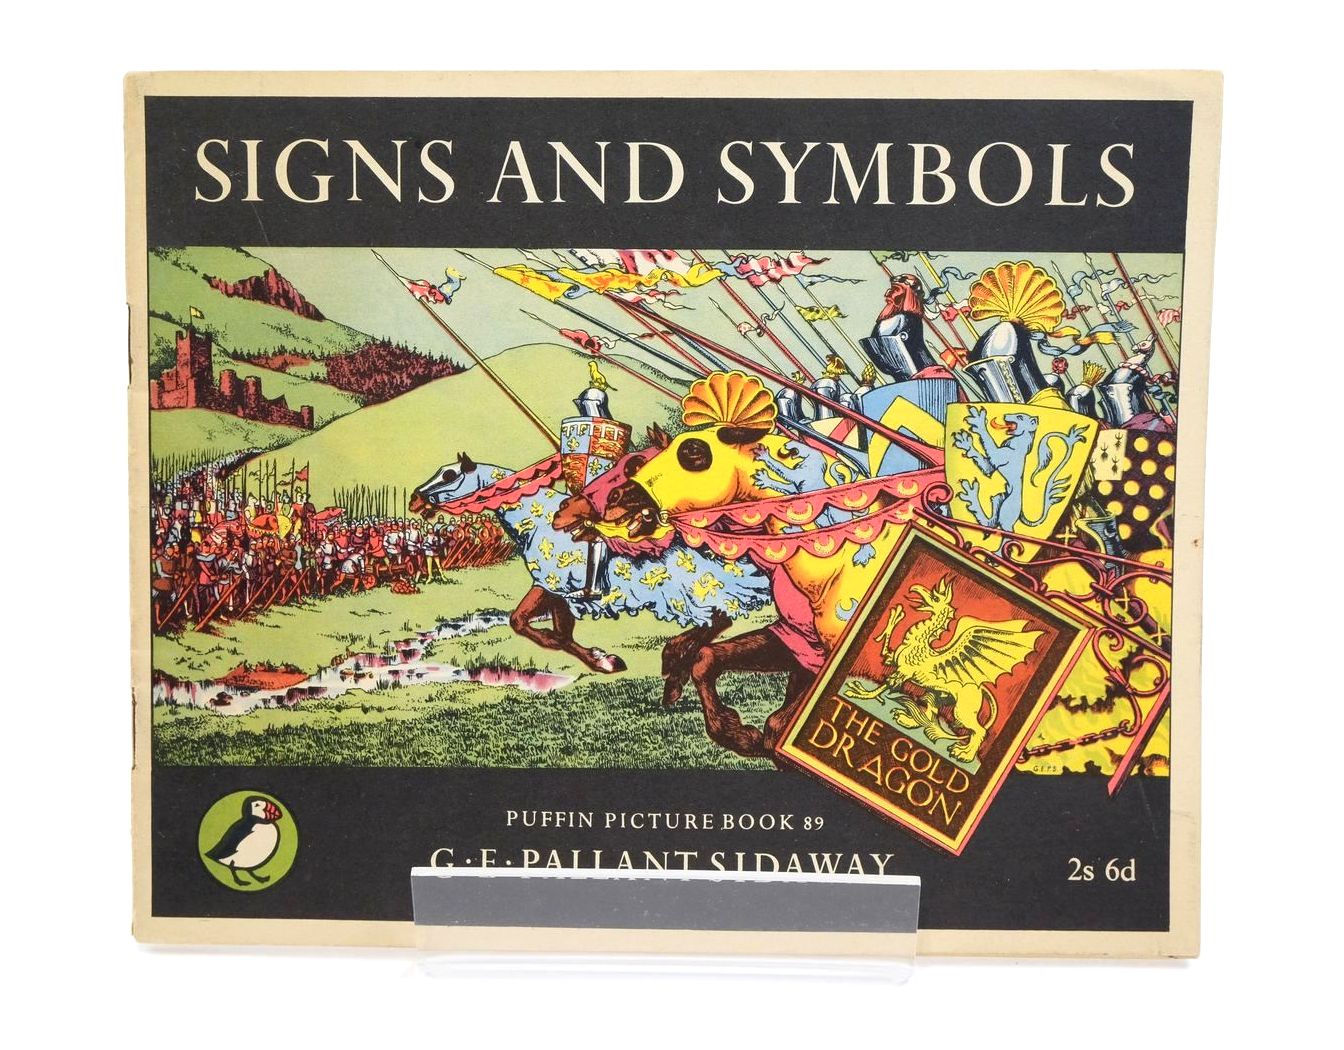 Photo of SIGNS AND SYMBOLS written by Sidaway, G.E. Pallant illustrated by Sidaway, G.E. Pallant published by Penguin Books (STOCK CODE: 1323195)  for sale by Stella & Rose's Books